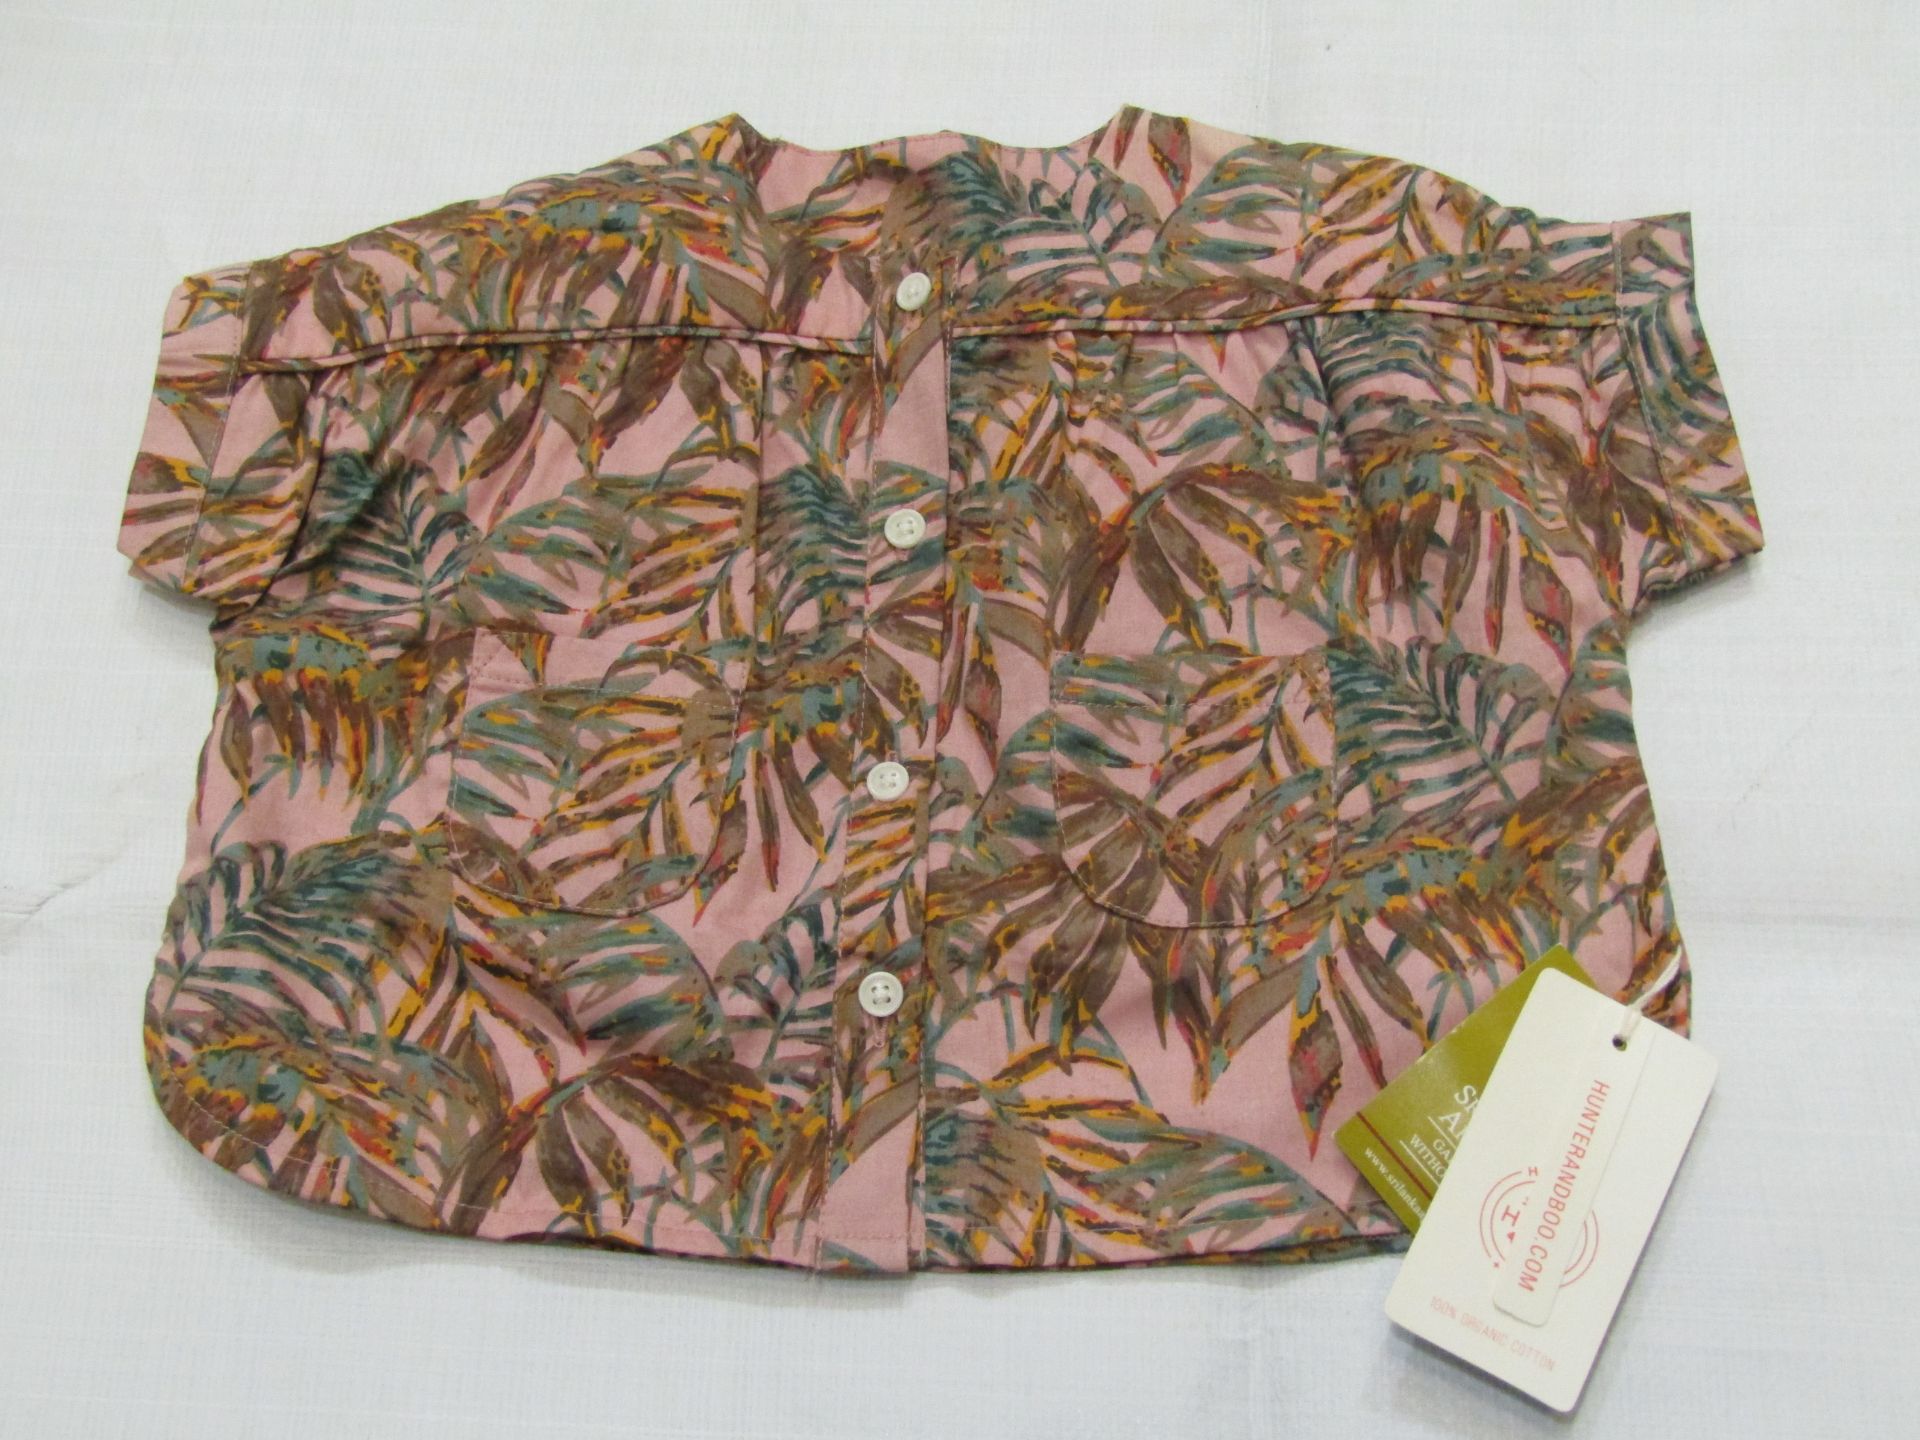 Hunter & Boo Nude Palawan Blouse Aged 6-12 Months New & Packaged RRP £21 - Image 2 of 2